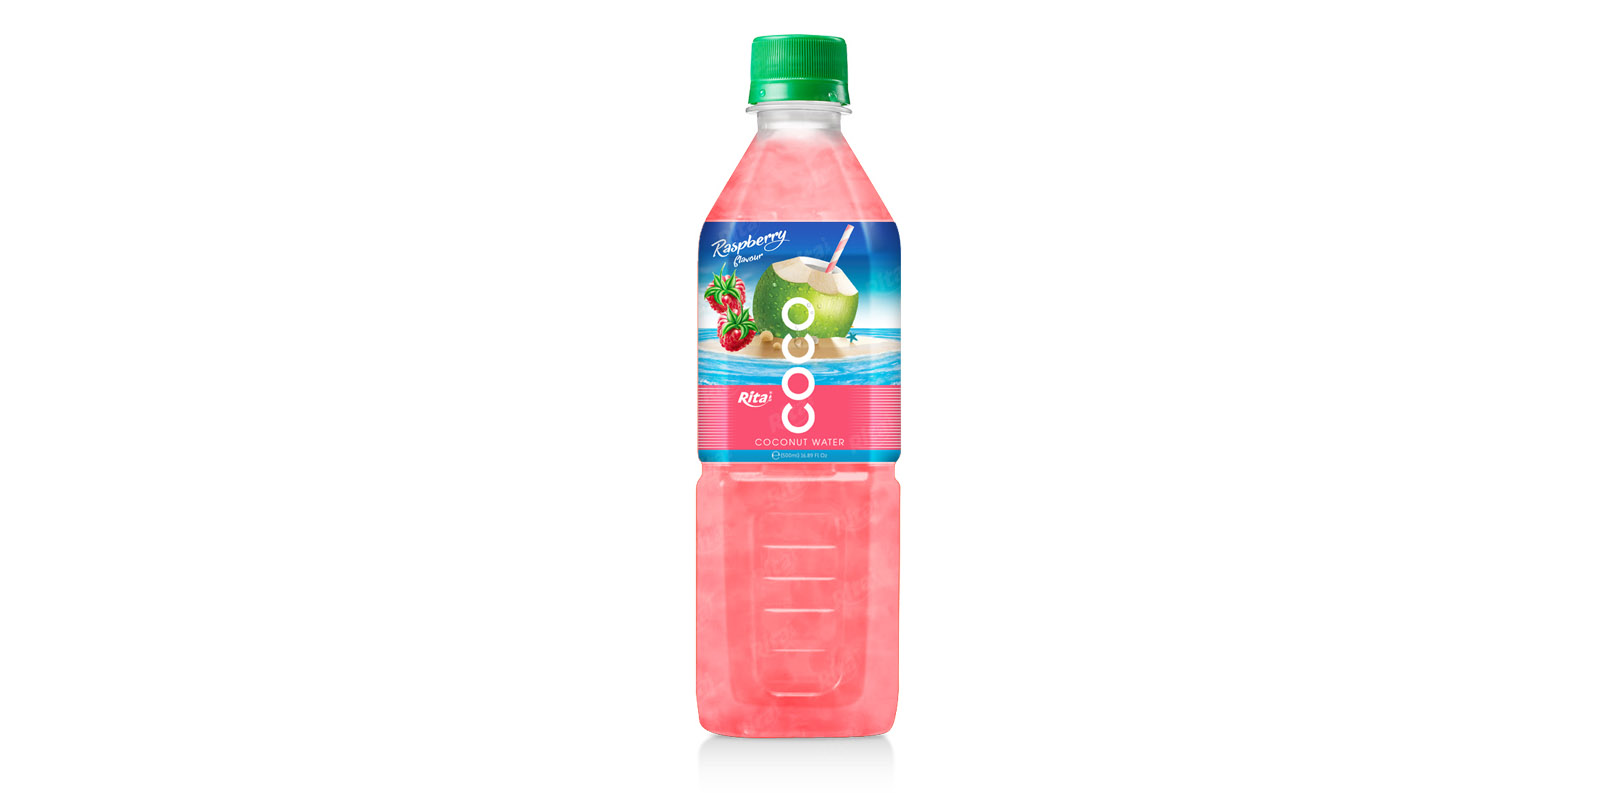 healthy juices Coconut water with strawberry flavor